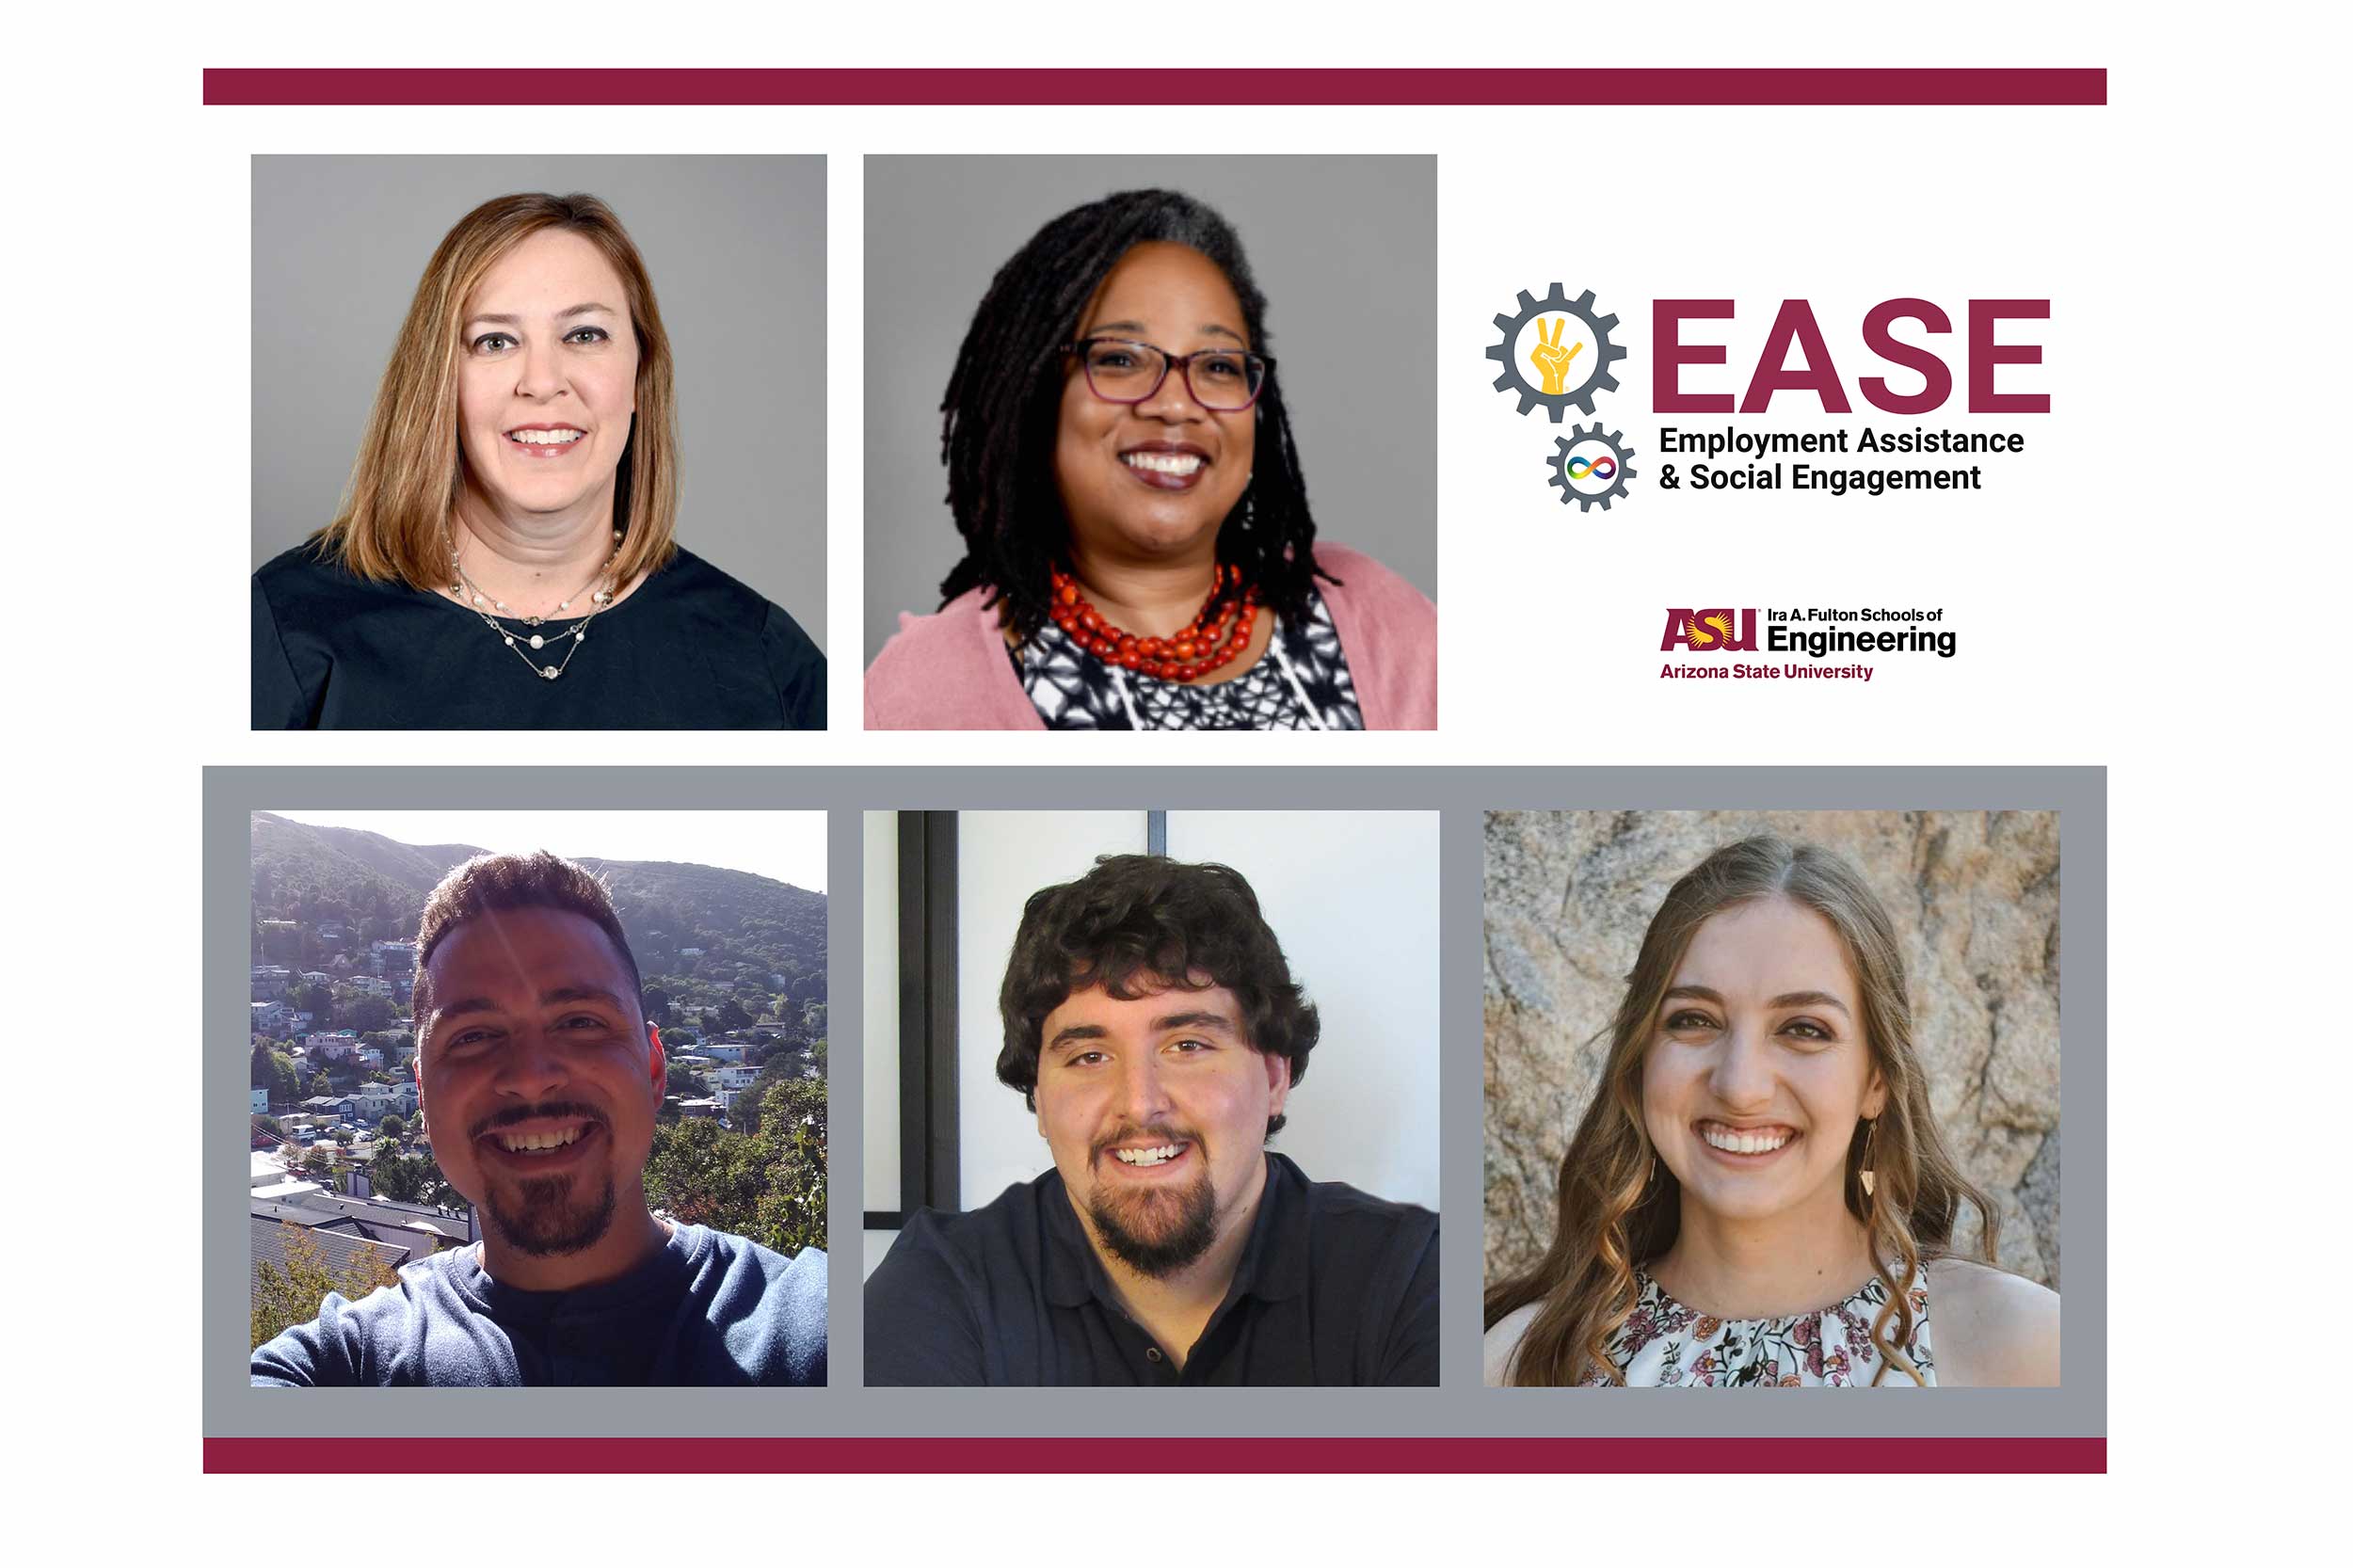 Deana Delp, Maria Dixon and three other support people for the EASE program at ASU